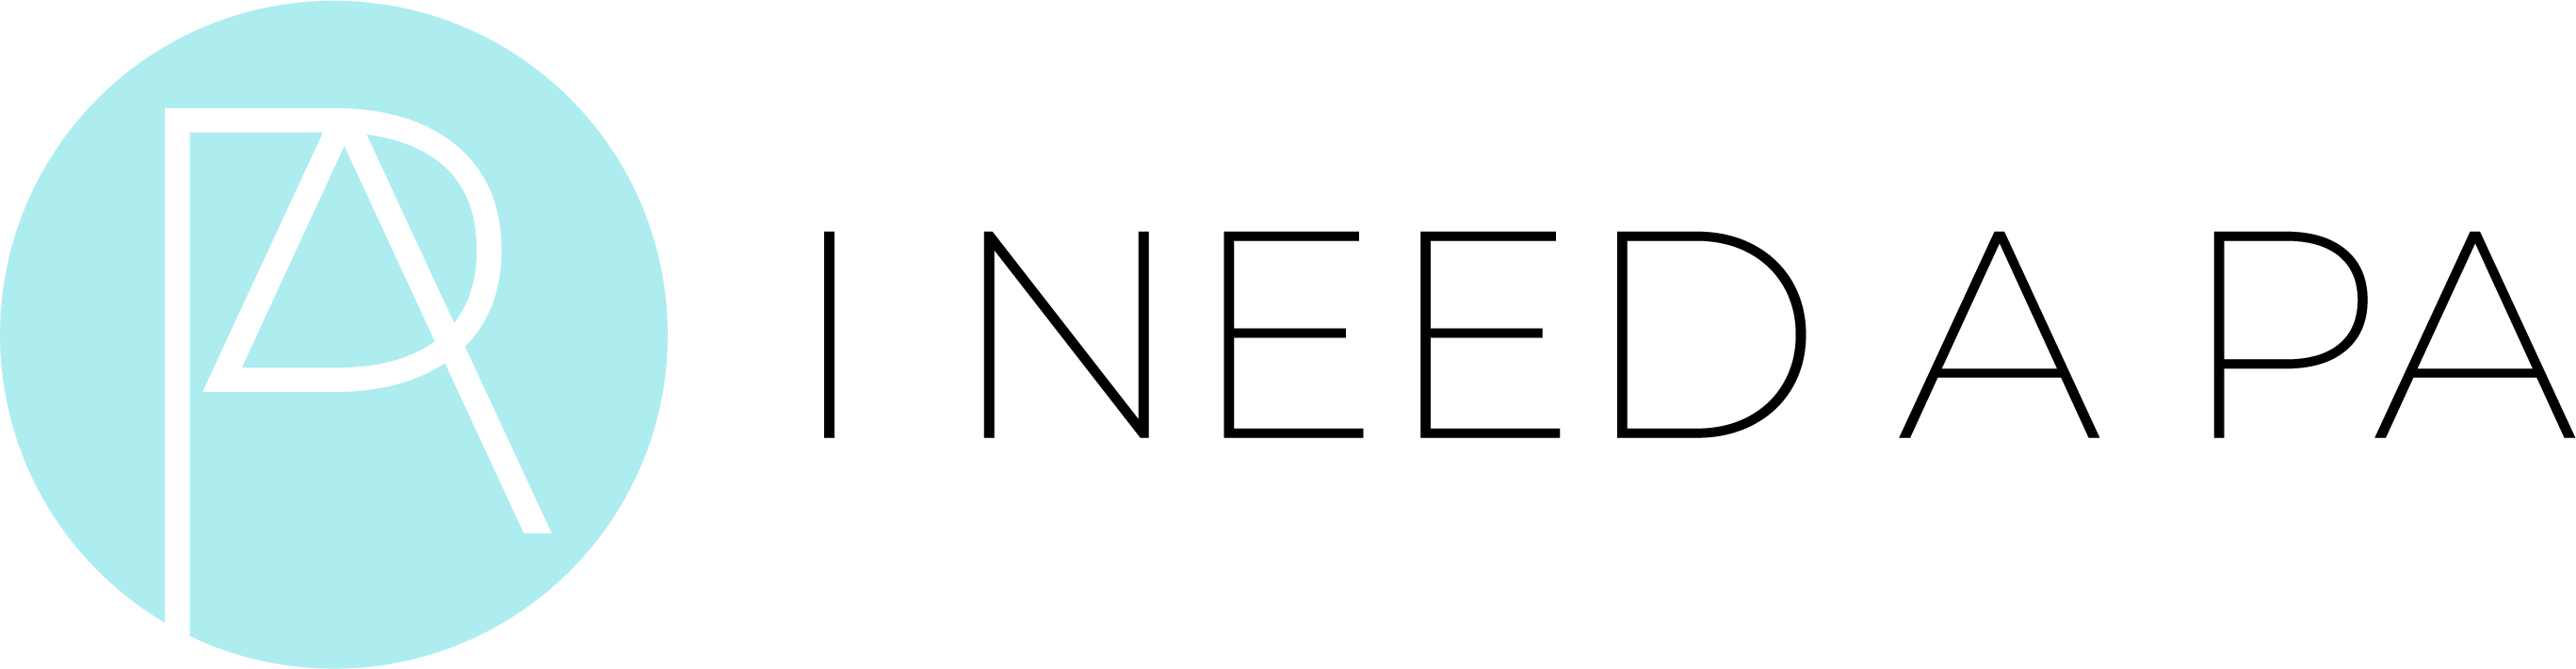 Logo of I Need a Personal Assistant Limited